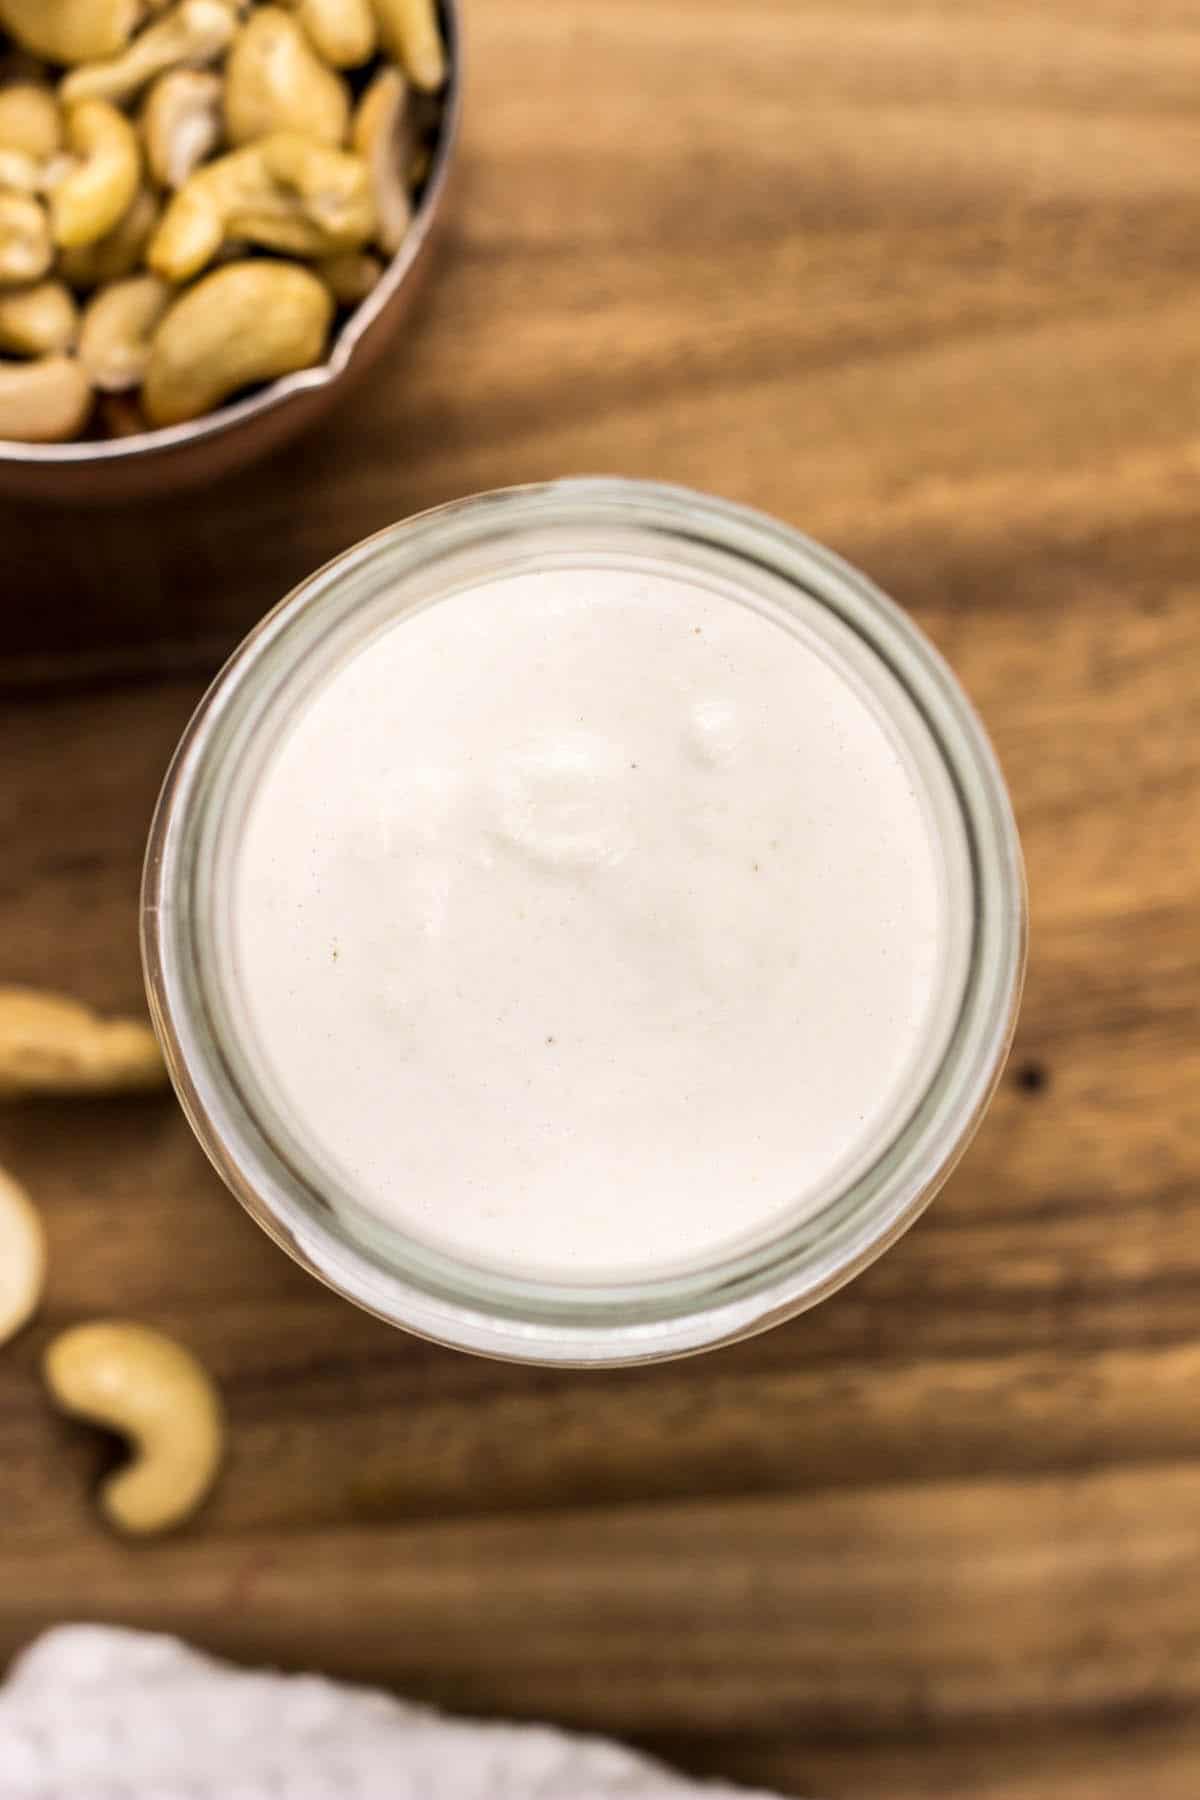 Top view of a small jar of Cashew Cream on a wooden board with a few cashews surrounding.